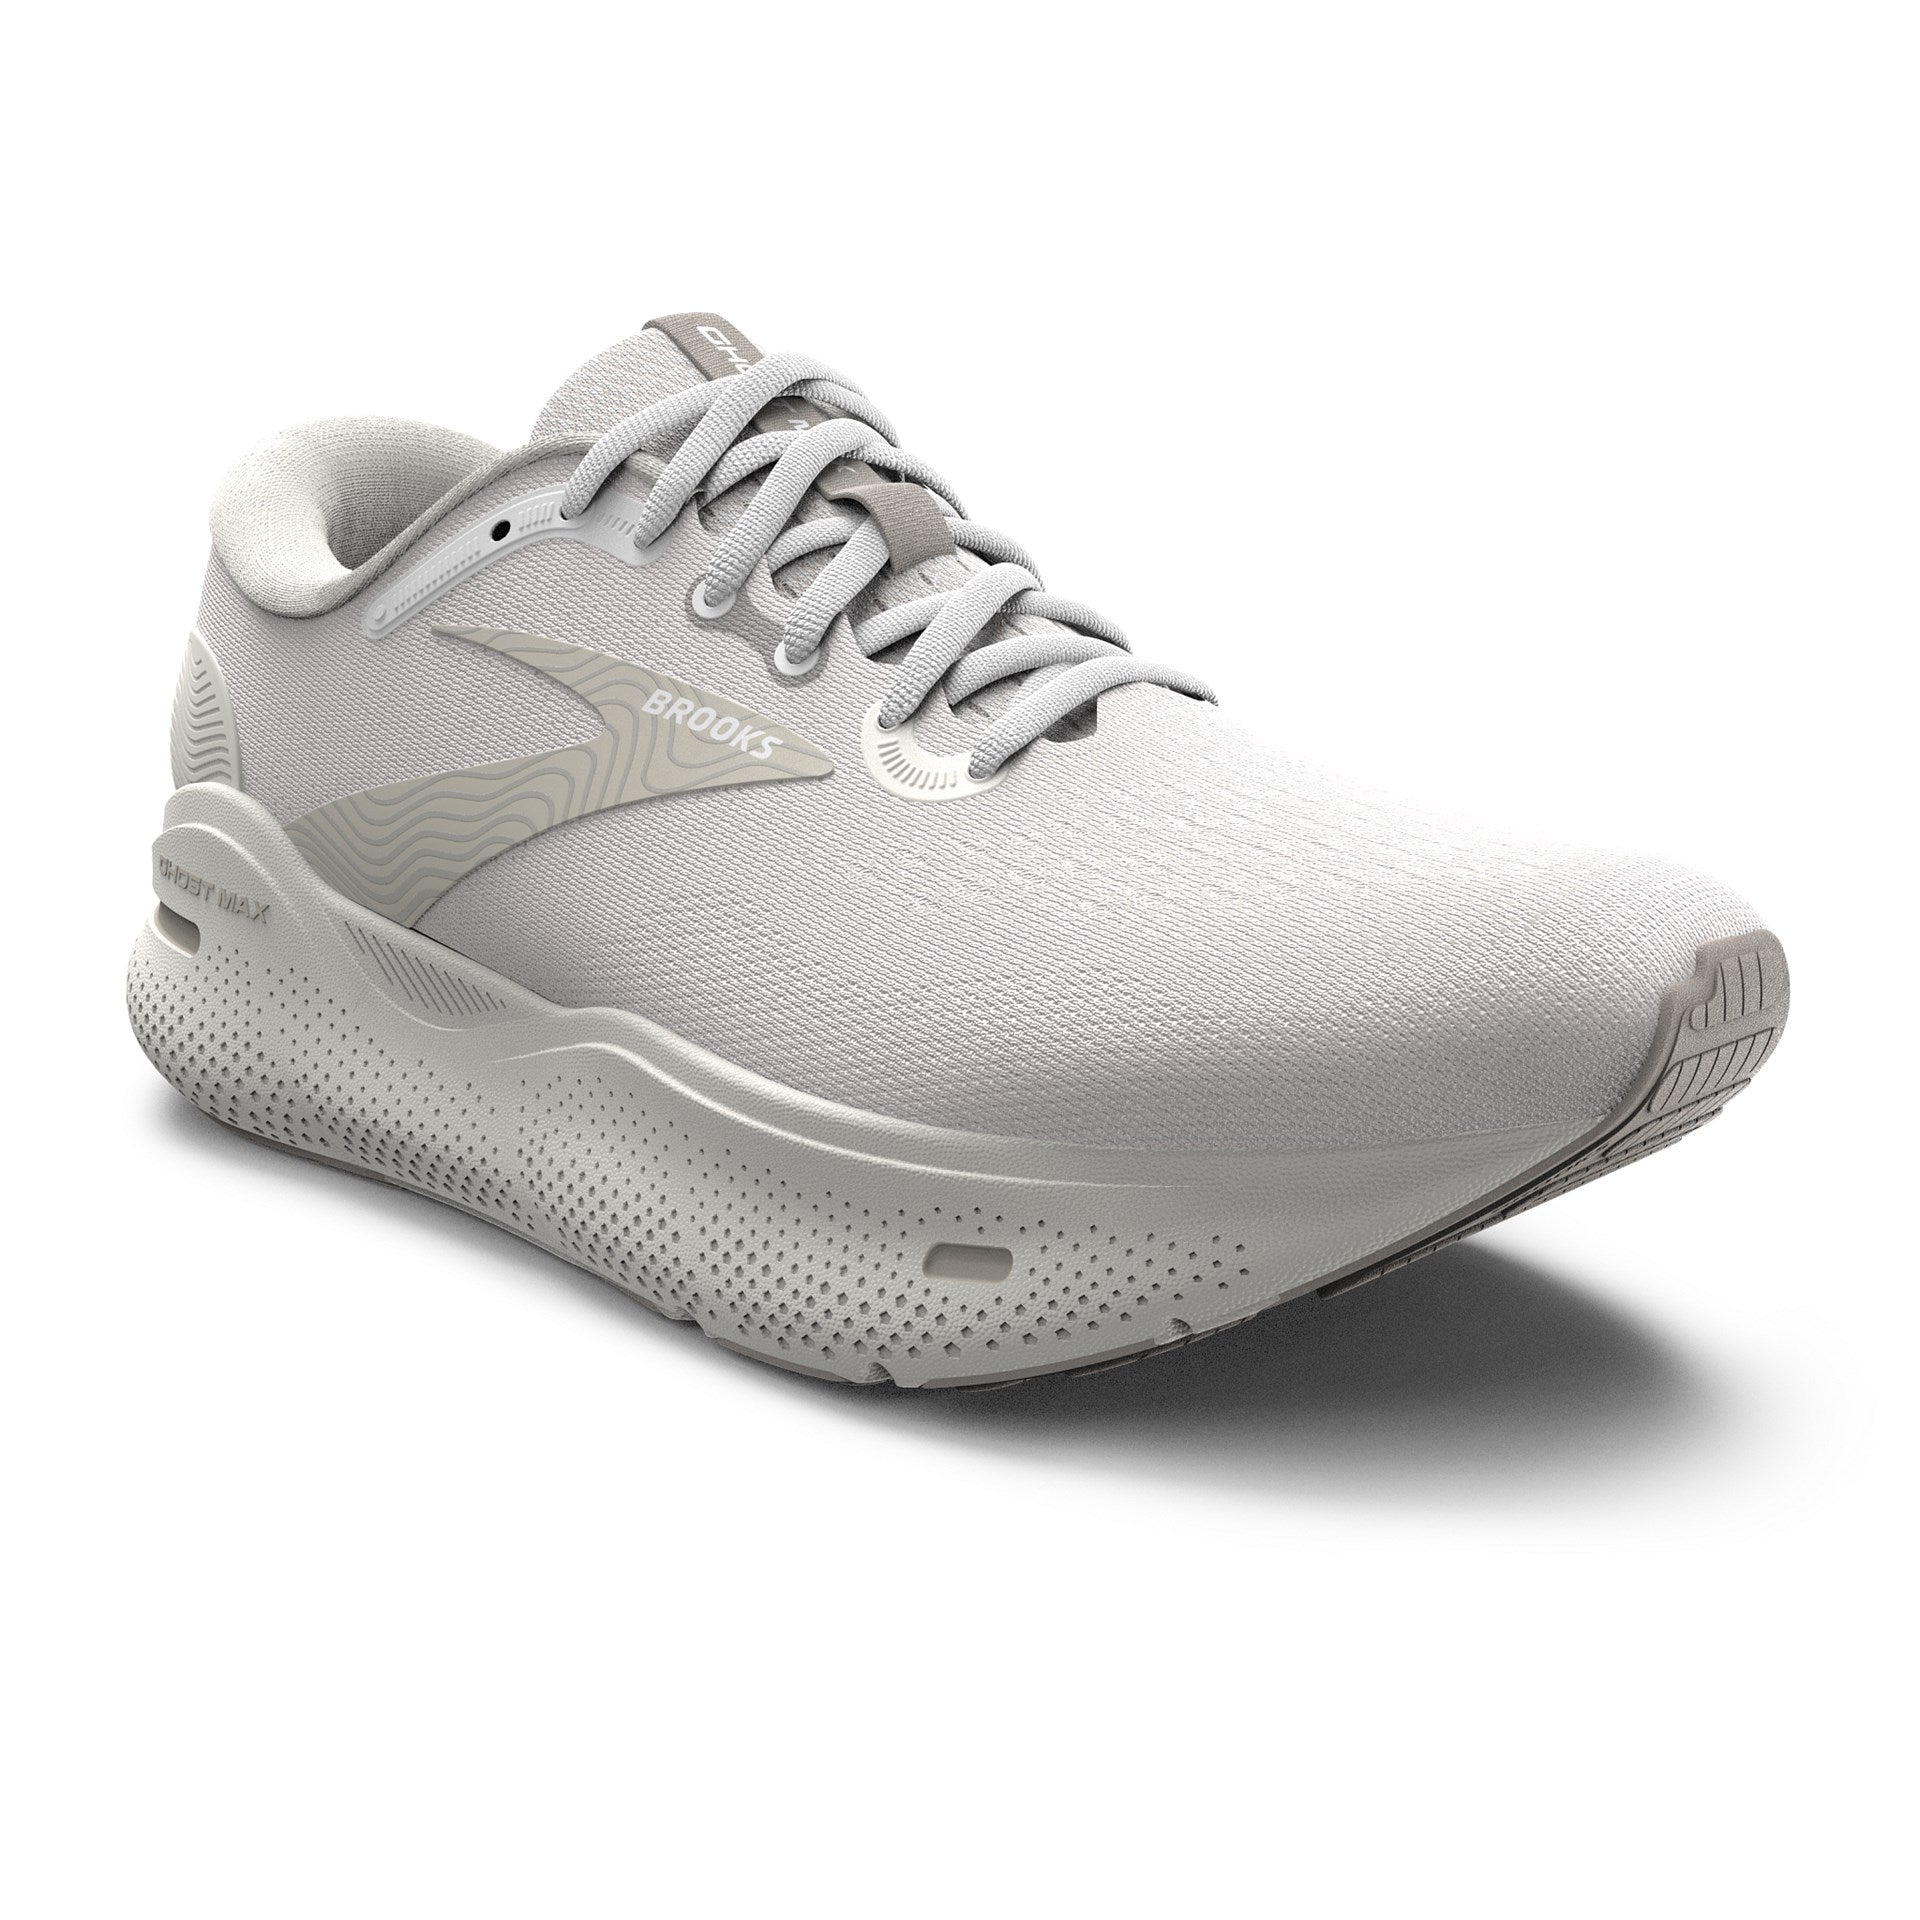 BROOKS MEN'S GHOST MAX - D - 174 COCONUT/WHITE SAND/CHATEAU 